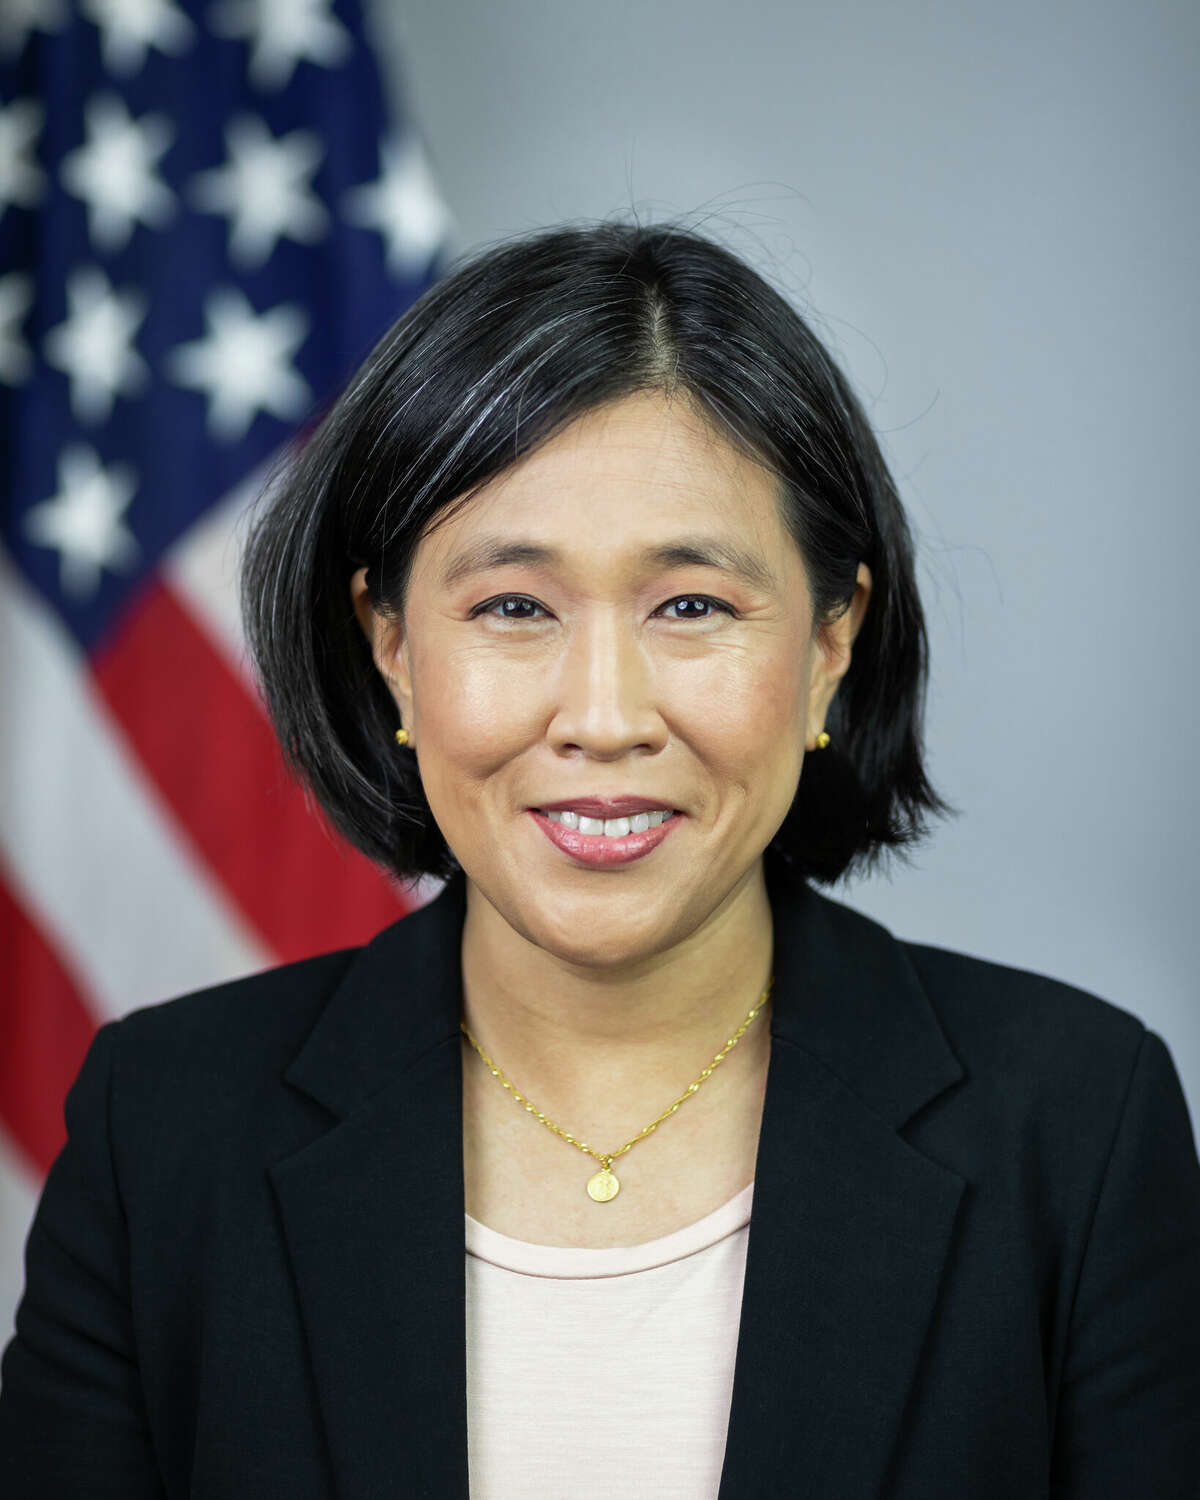 U.S. Trade Representative Katherine Tai poses for her official portrait Thursday, May 6, 2021, in the Eisenhower Executive Office Building at the White House. (Official White House Photo by Stephanie Chasez)